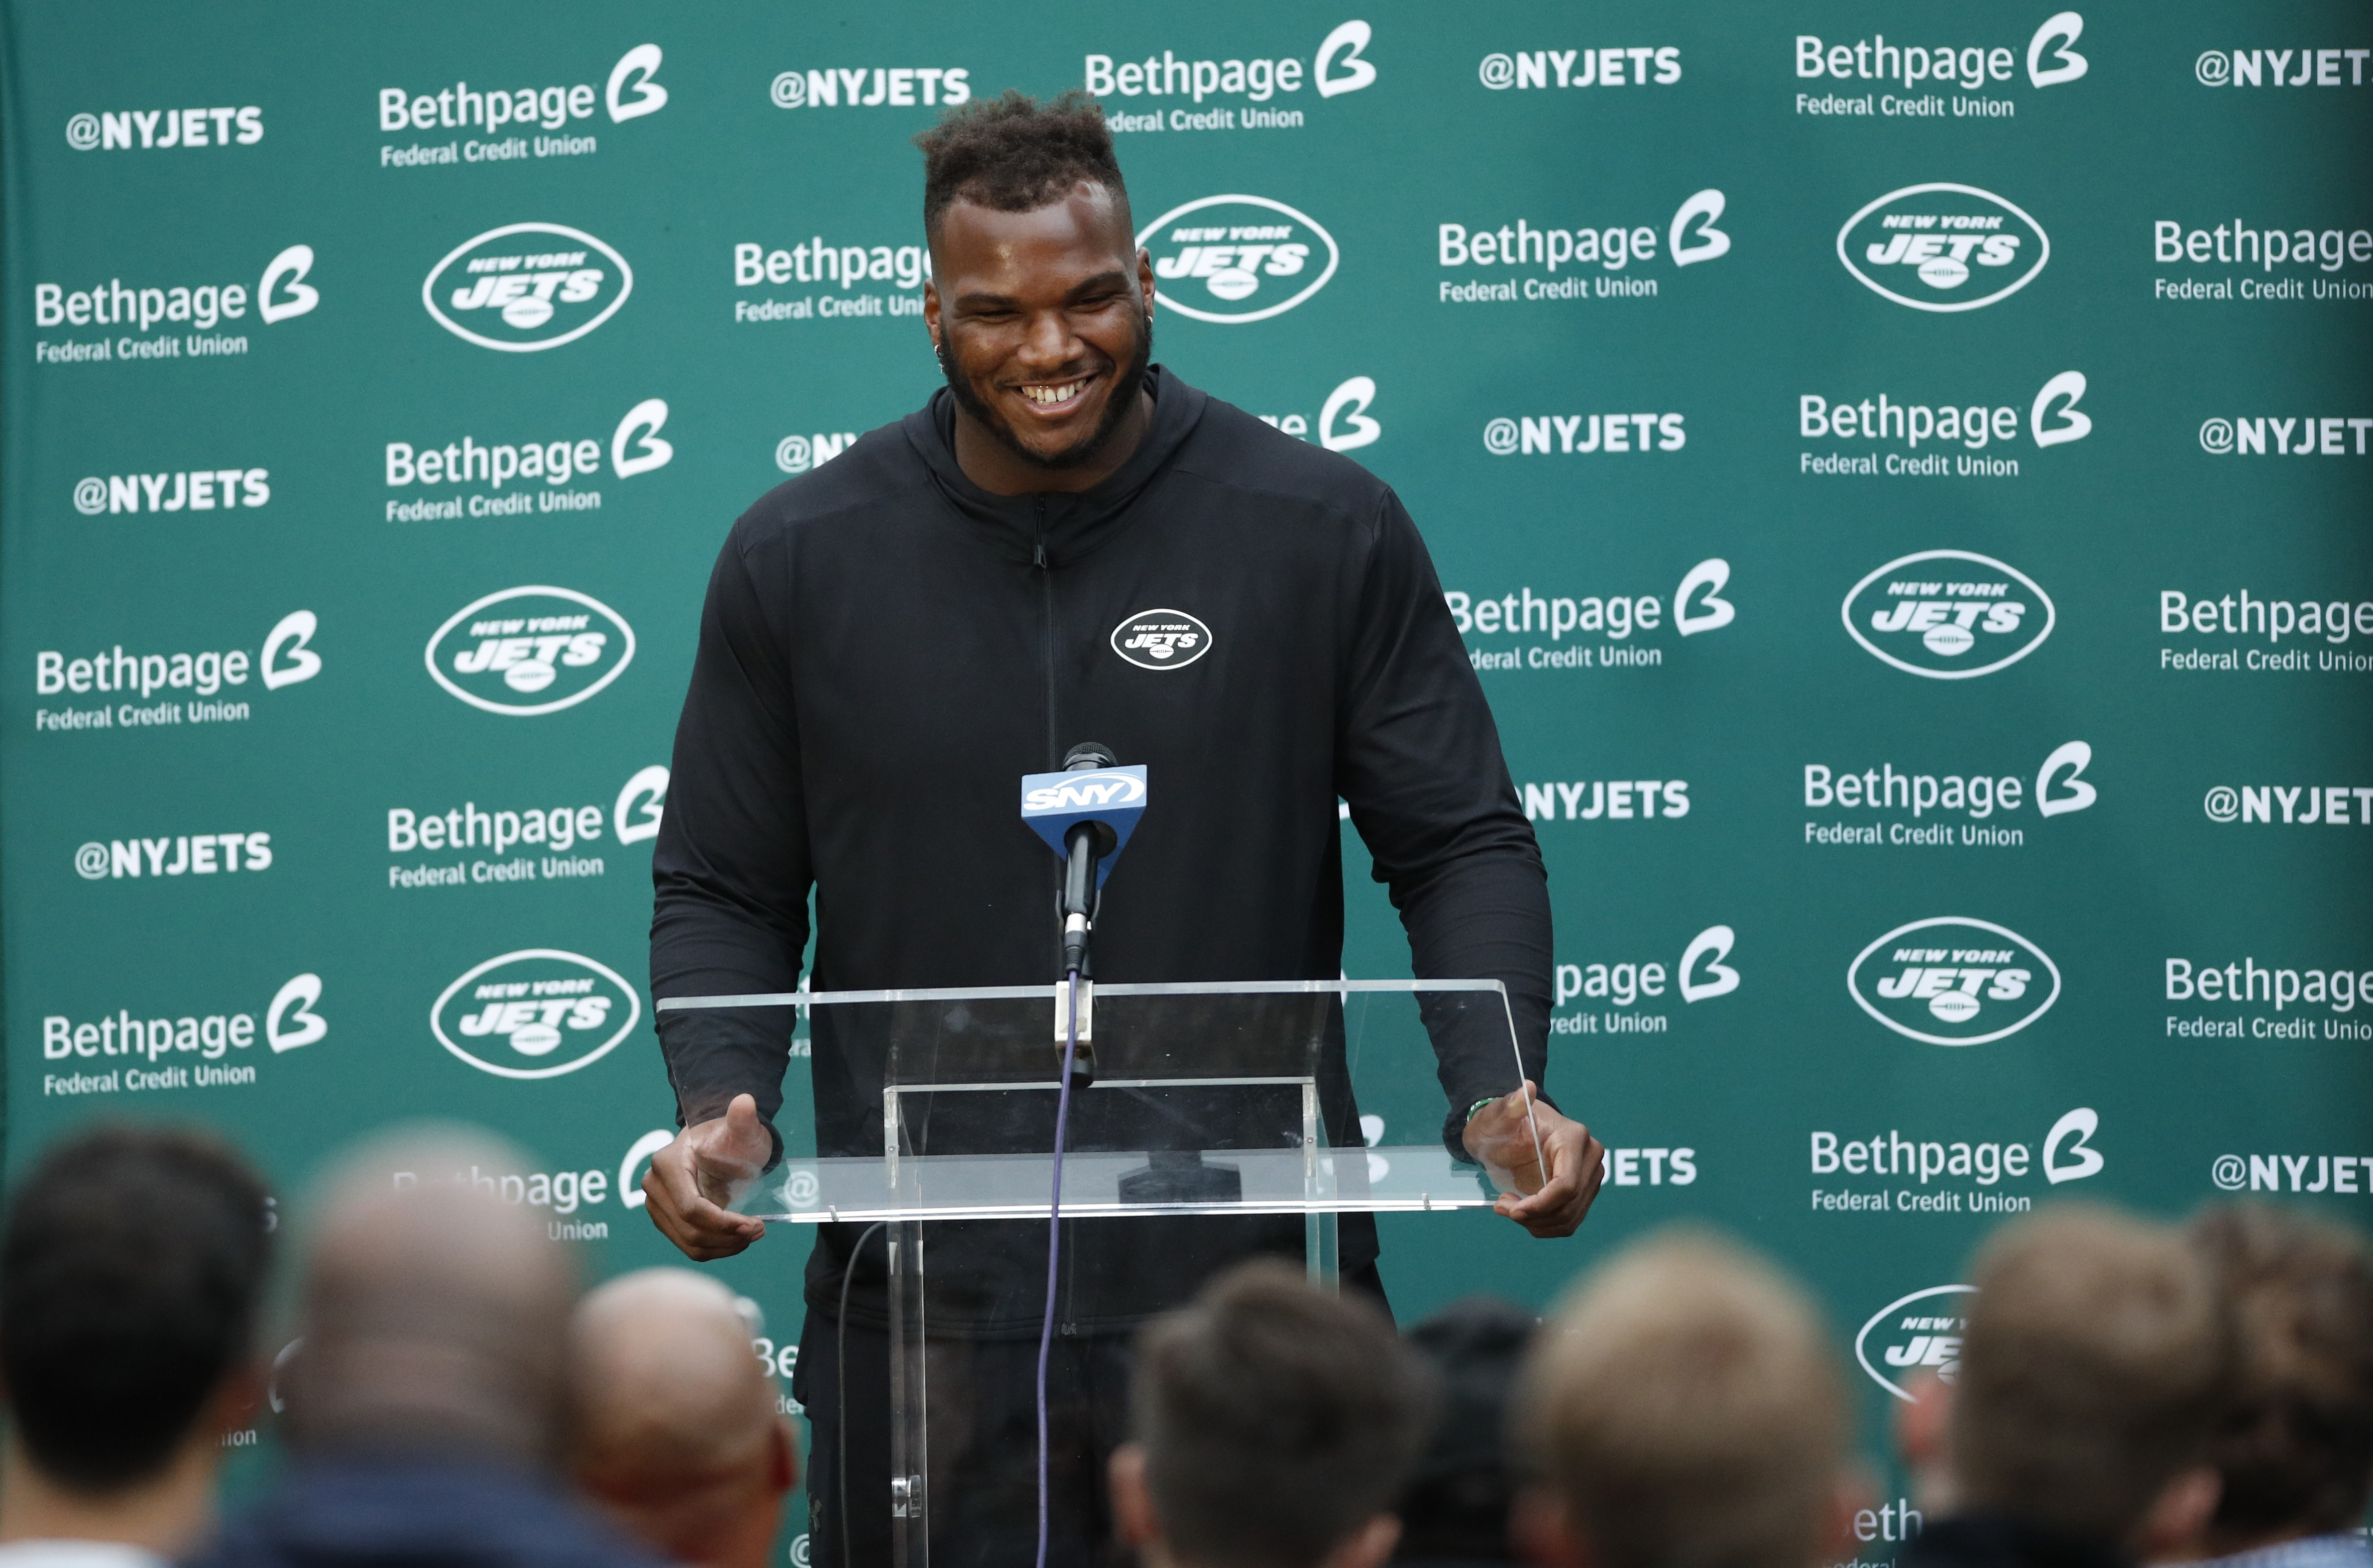 NFL - New York Jets media day ahead of their London match